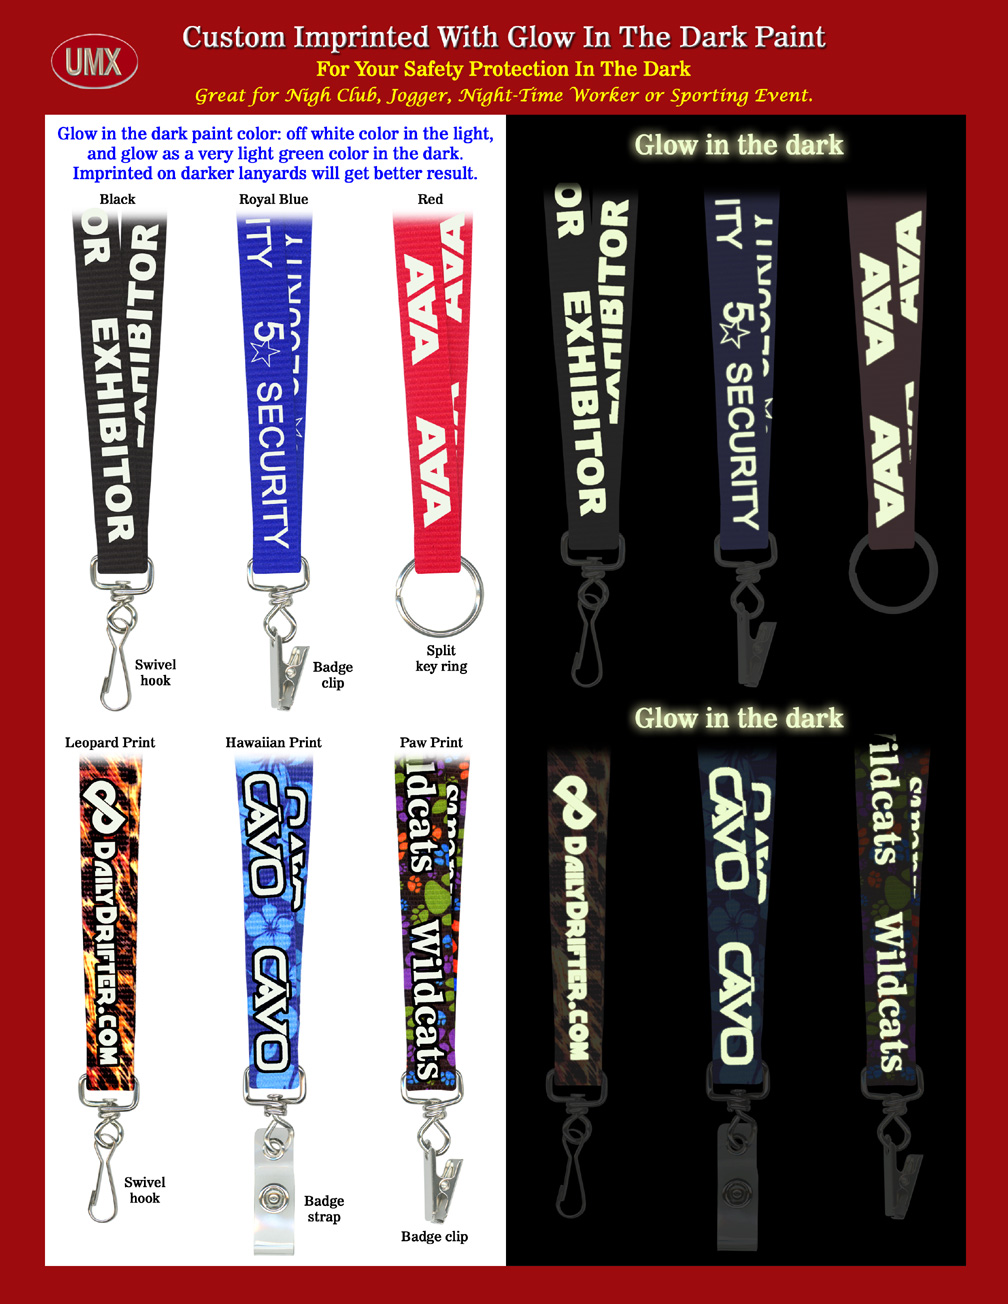 Special Imprinting Effects: Glow In The Dark Custom Printed Lanyards or Straps